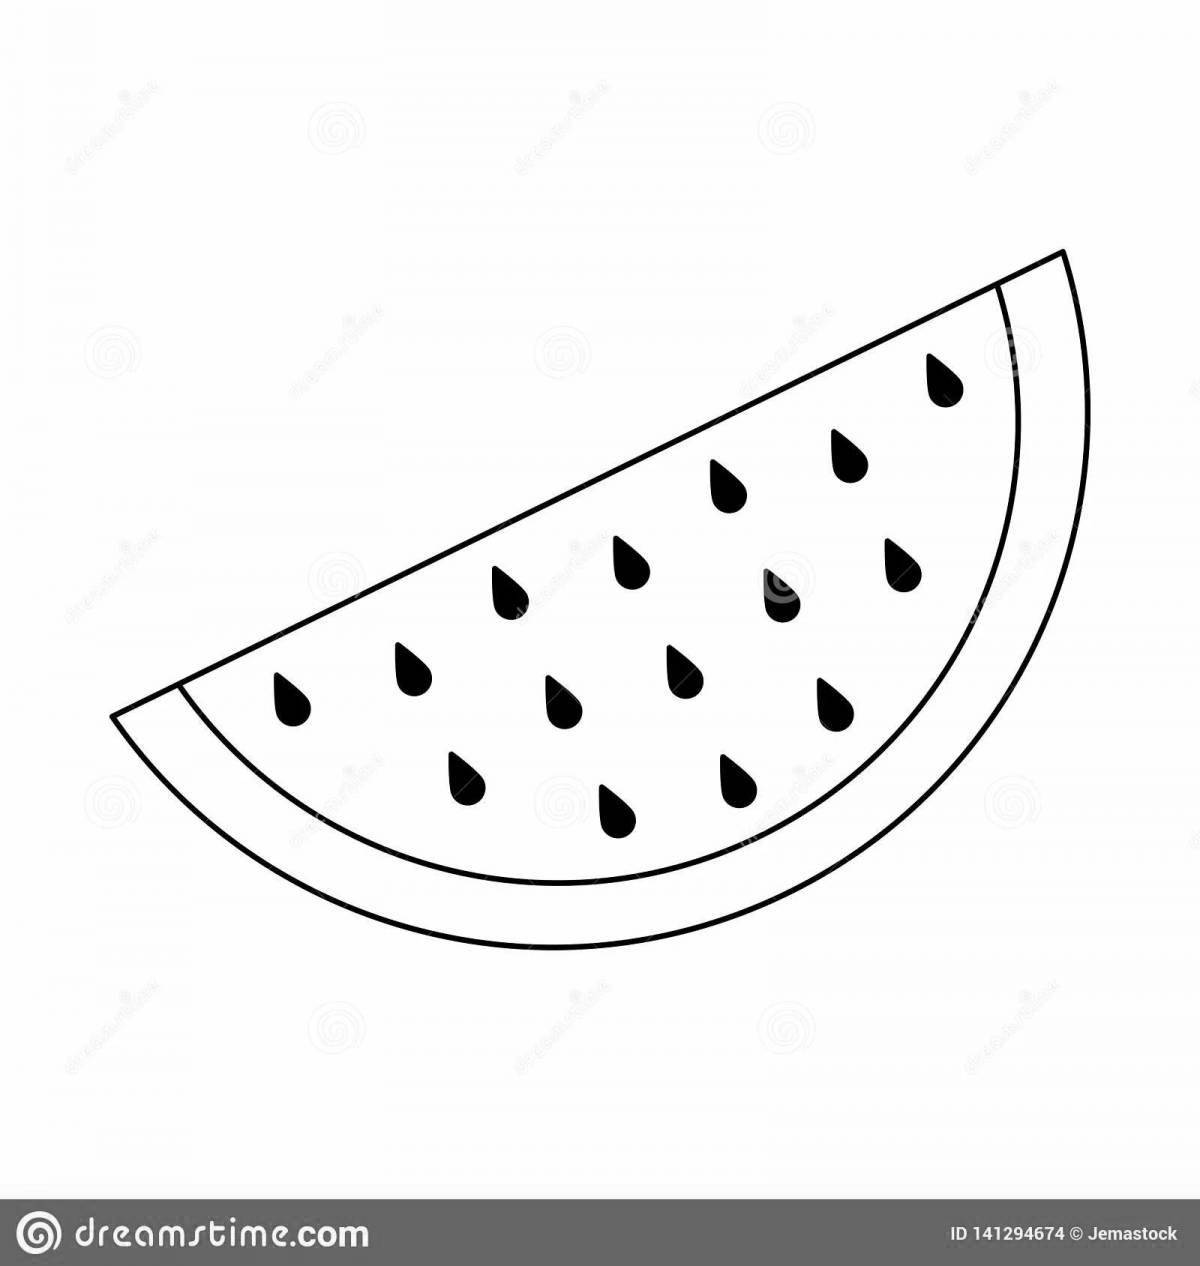 Glowing slice of watermelon coloring page